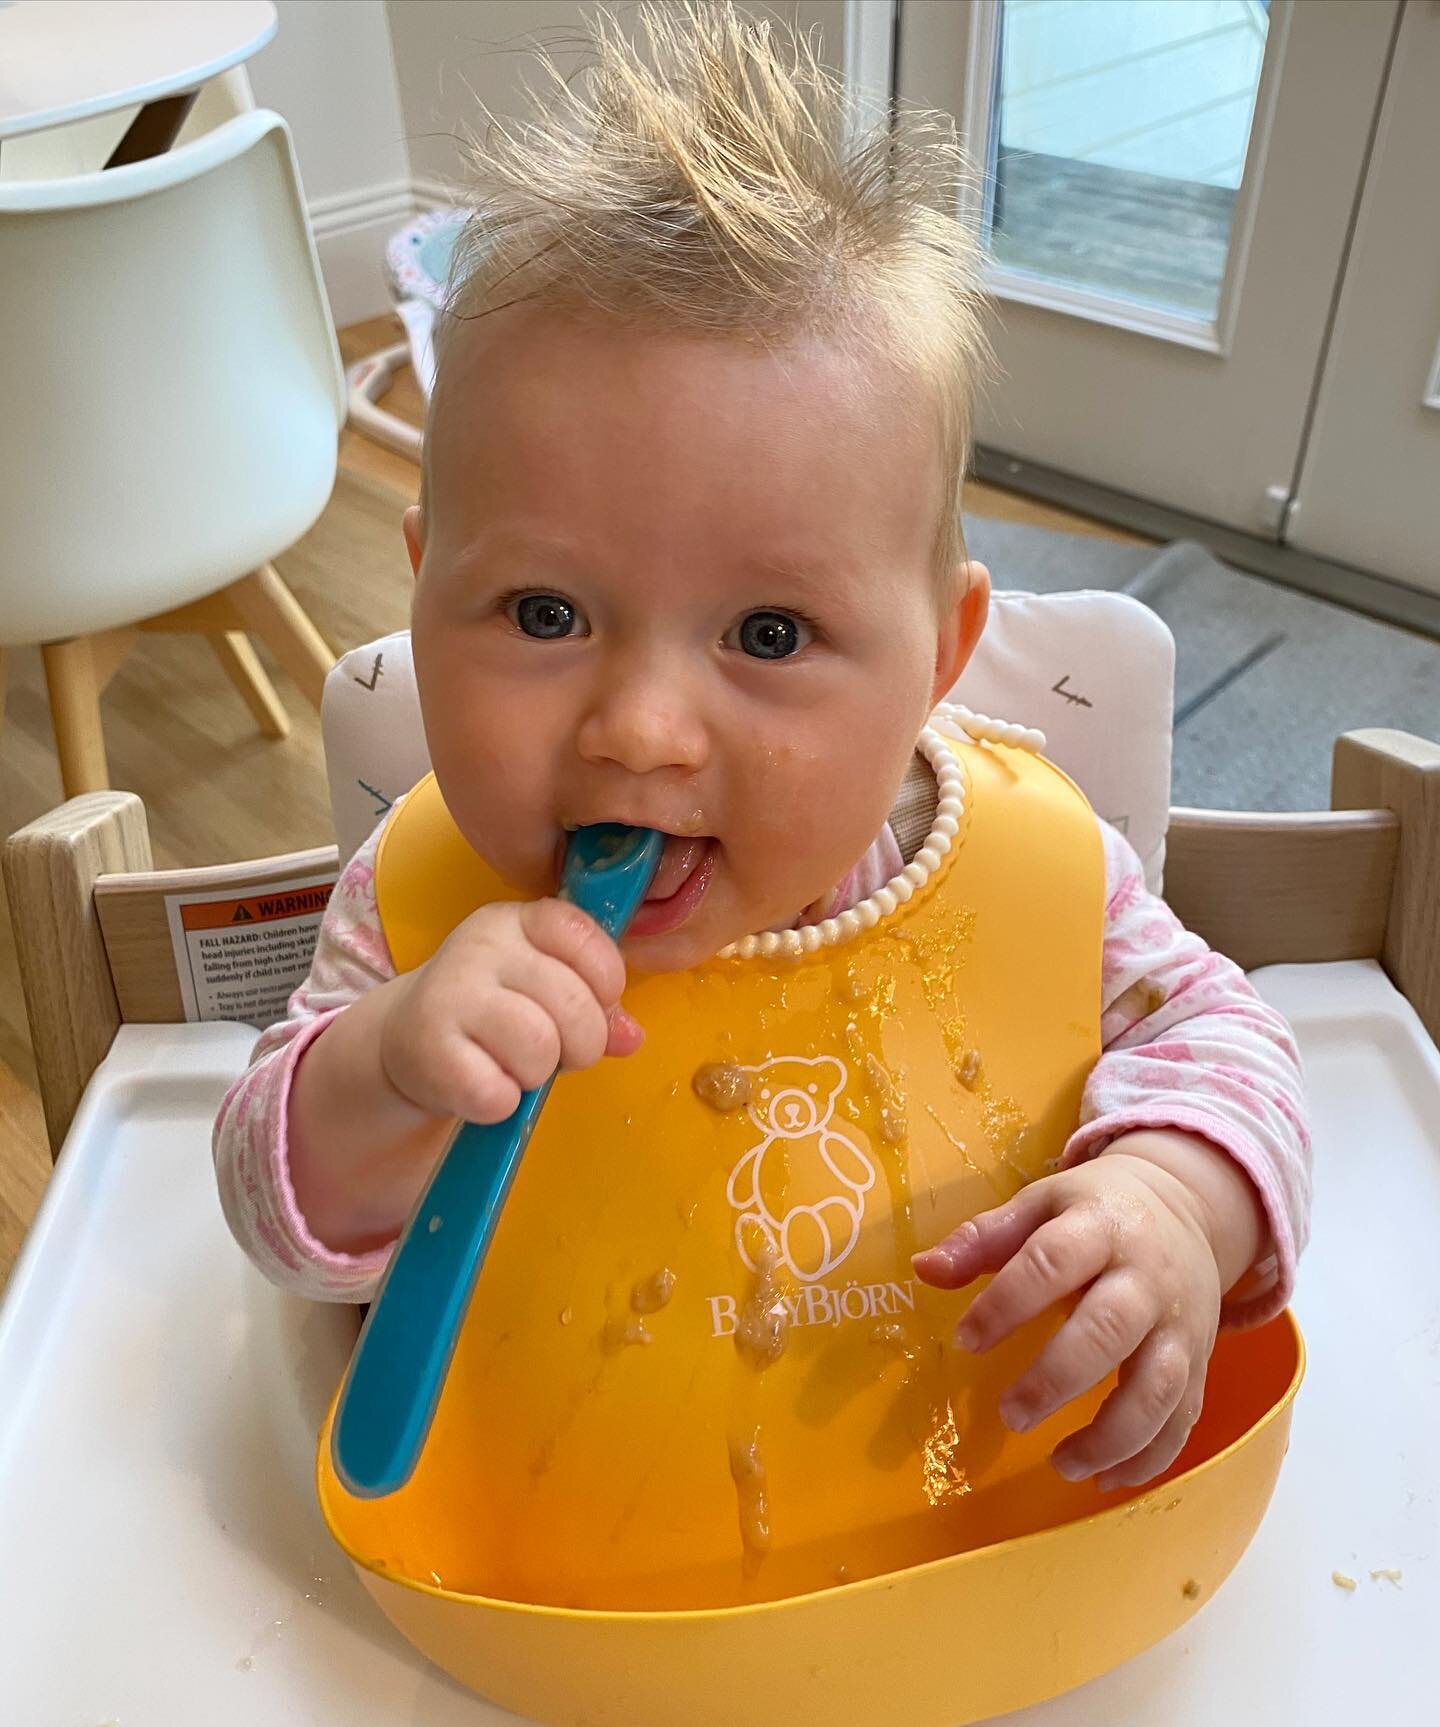 Bananas everywhere! We maybe got 20% in our mouth but definitely had fun 😊. There&rsquo;s so much information out there about how/when/what to feed your baby - we want to take the approach of mostly baby led weaning. But we&rsquo;re starting with pu